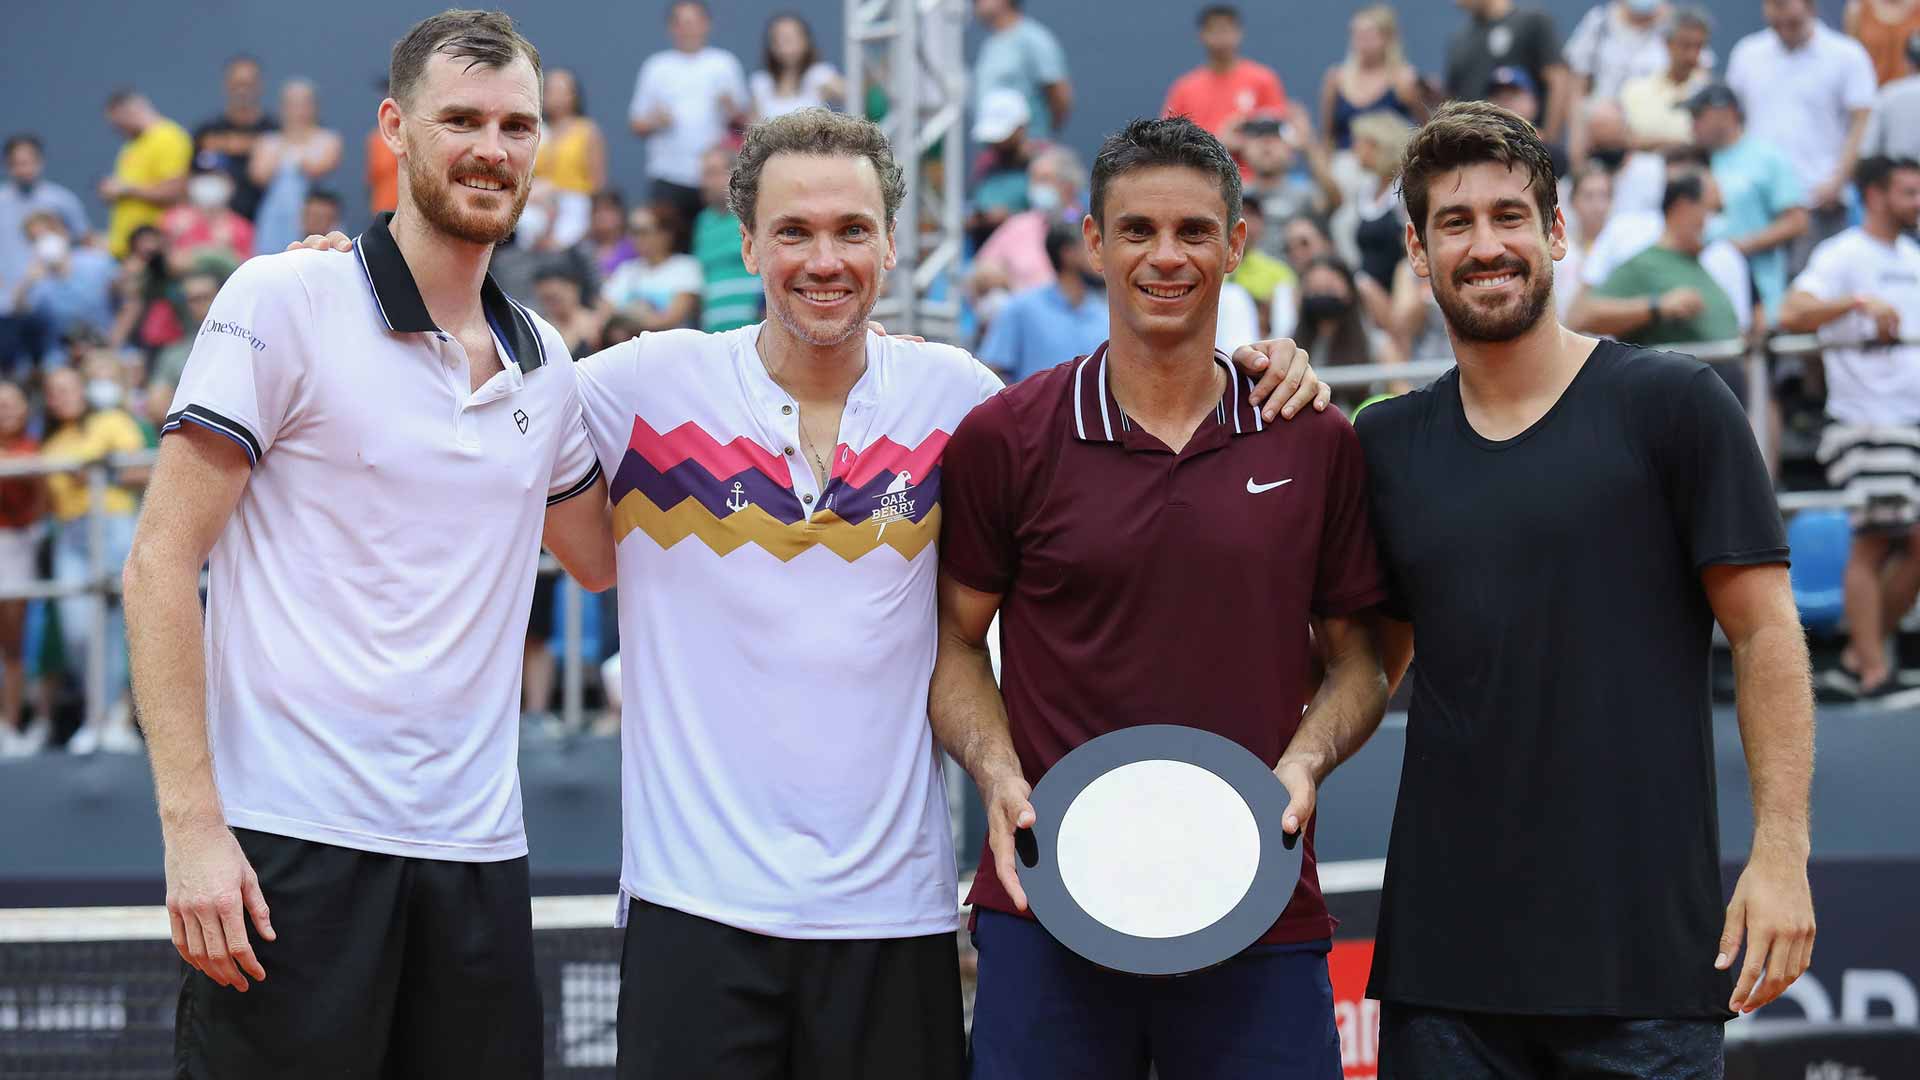 <a href='https://www.atptour.com/en/players/jamie-murray/mc81/overview'>Jamie Murray</a>, <a href='https://www.atptour.com/en/players/bruno-soares/s938/overview'>Bruno Soares</a> and <a href='https://www.atptour.com/en/players/orlando-luz/lf26/overview'>Orlando Luz</a> (far right) celebrate the career of <a href='https://www.atptour.com/en/players/rogerio-dutra-silva/sc73/overview'>Rogerio Dutra Silva</a> (middle right) following the Brazilian's final match on Wednesday.